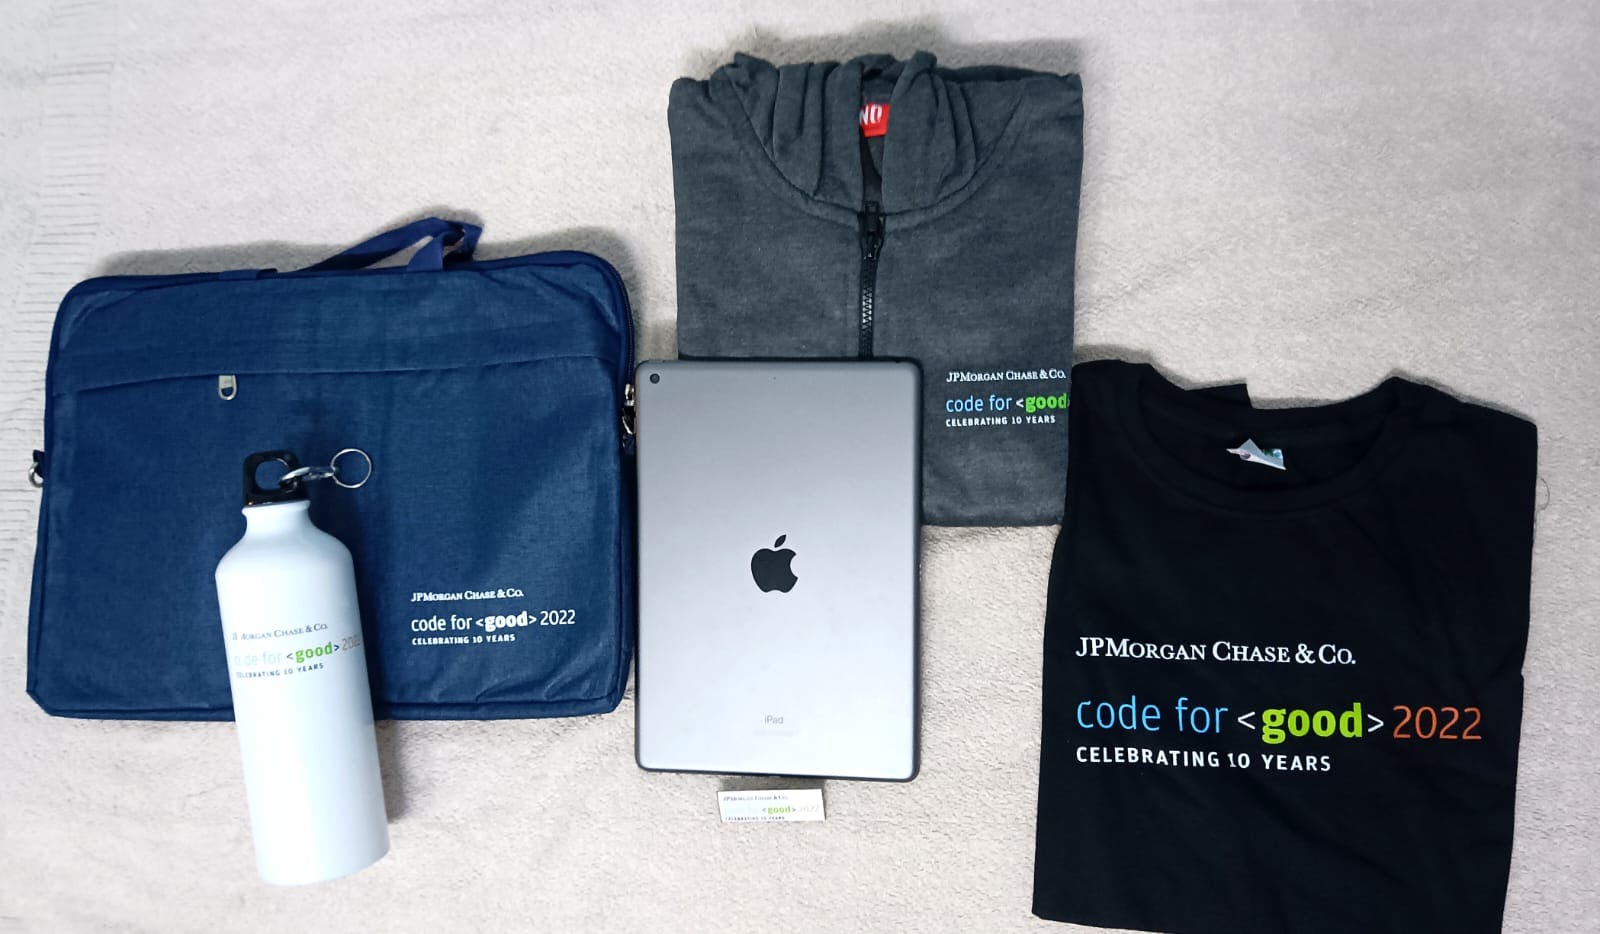 JPMC CFG 2022 Swag for Participants along with Ipad Gen 9 for Winners